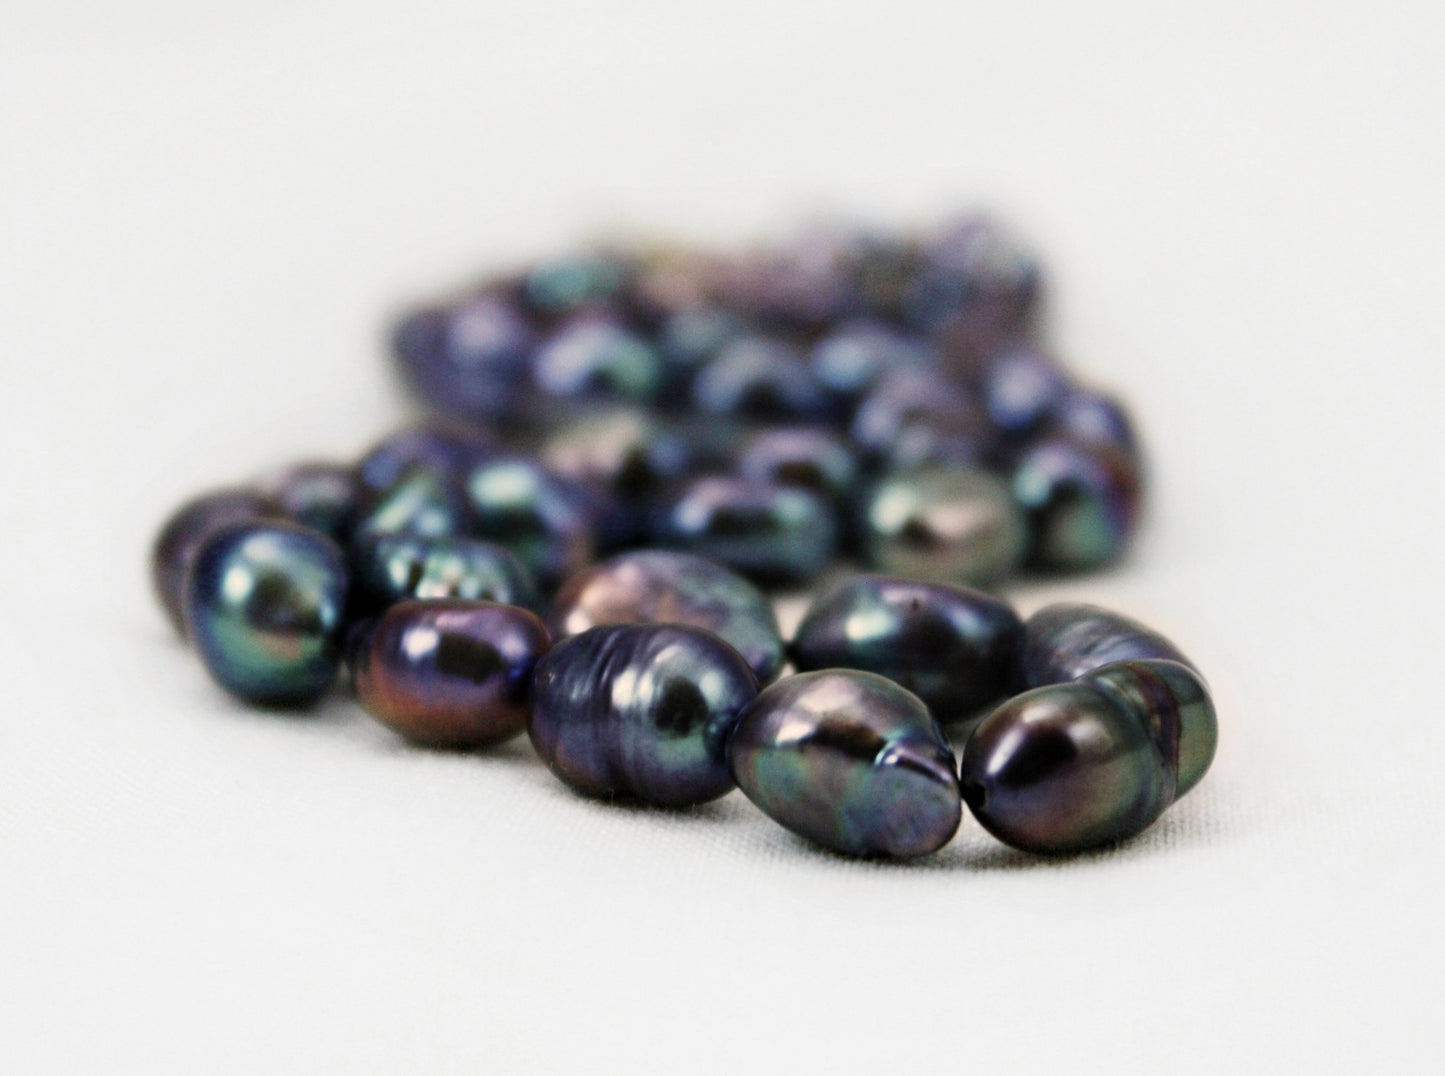 Galaxy Freshwater Pearl Necklace